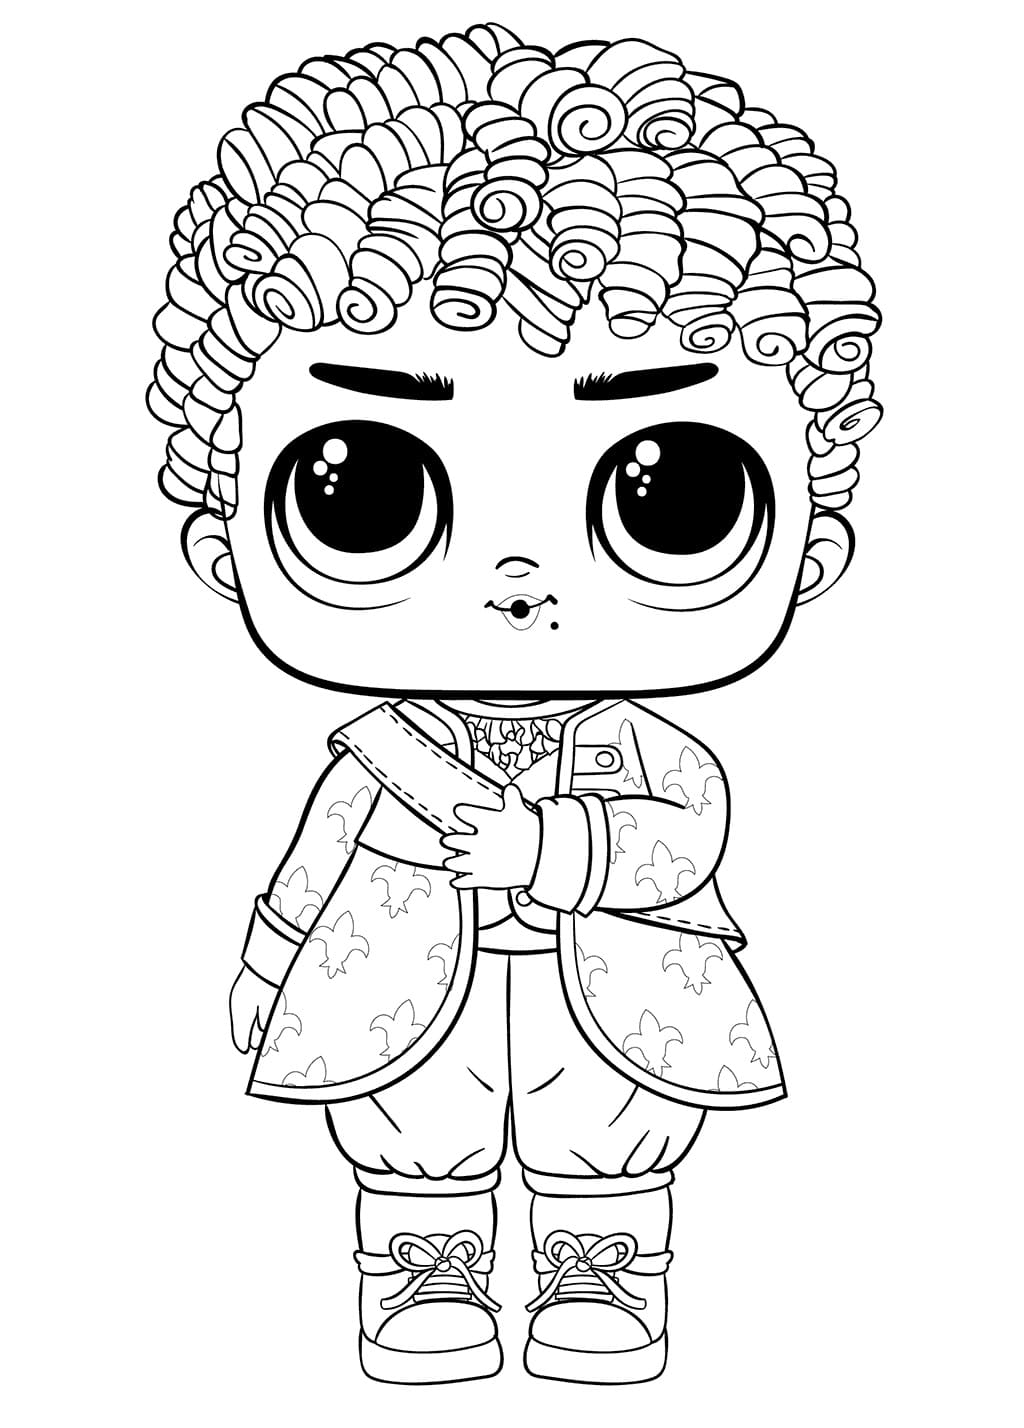 His Royal High-Ney LOL coloring page